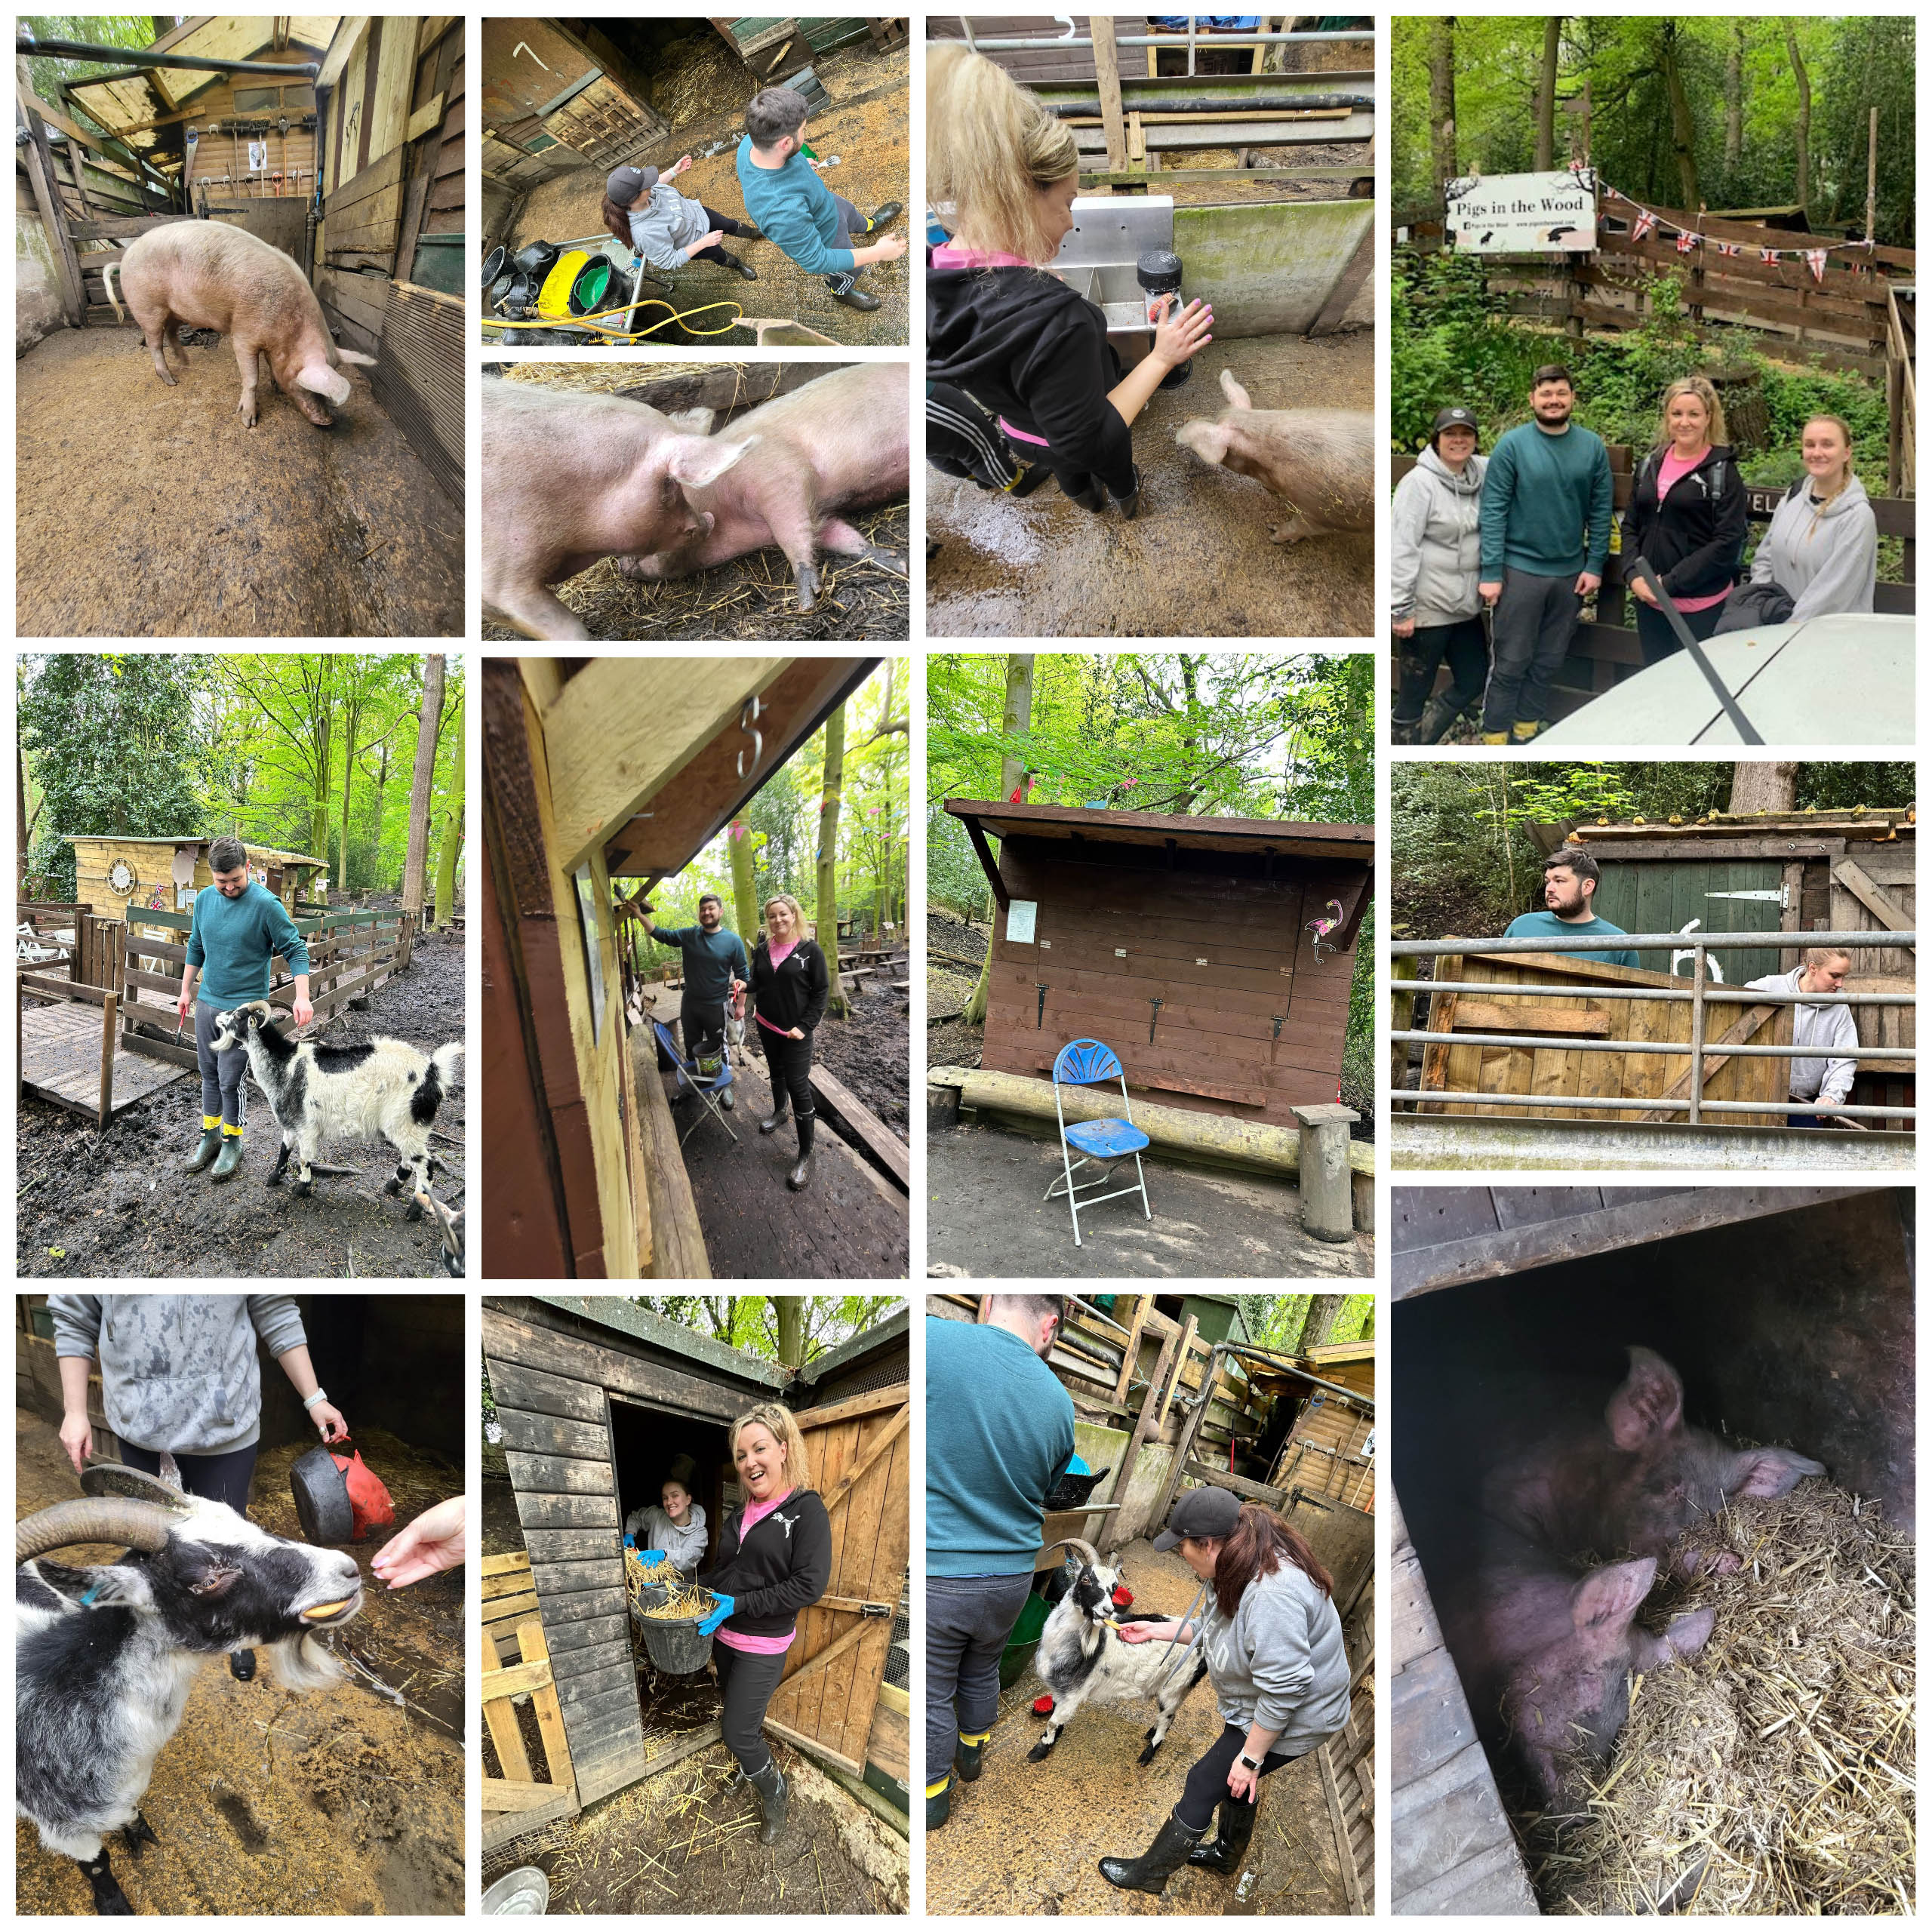 Pigs in the Wood Charity